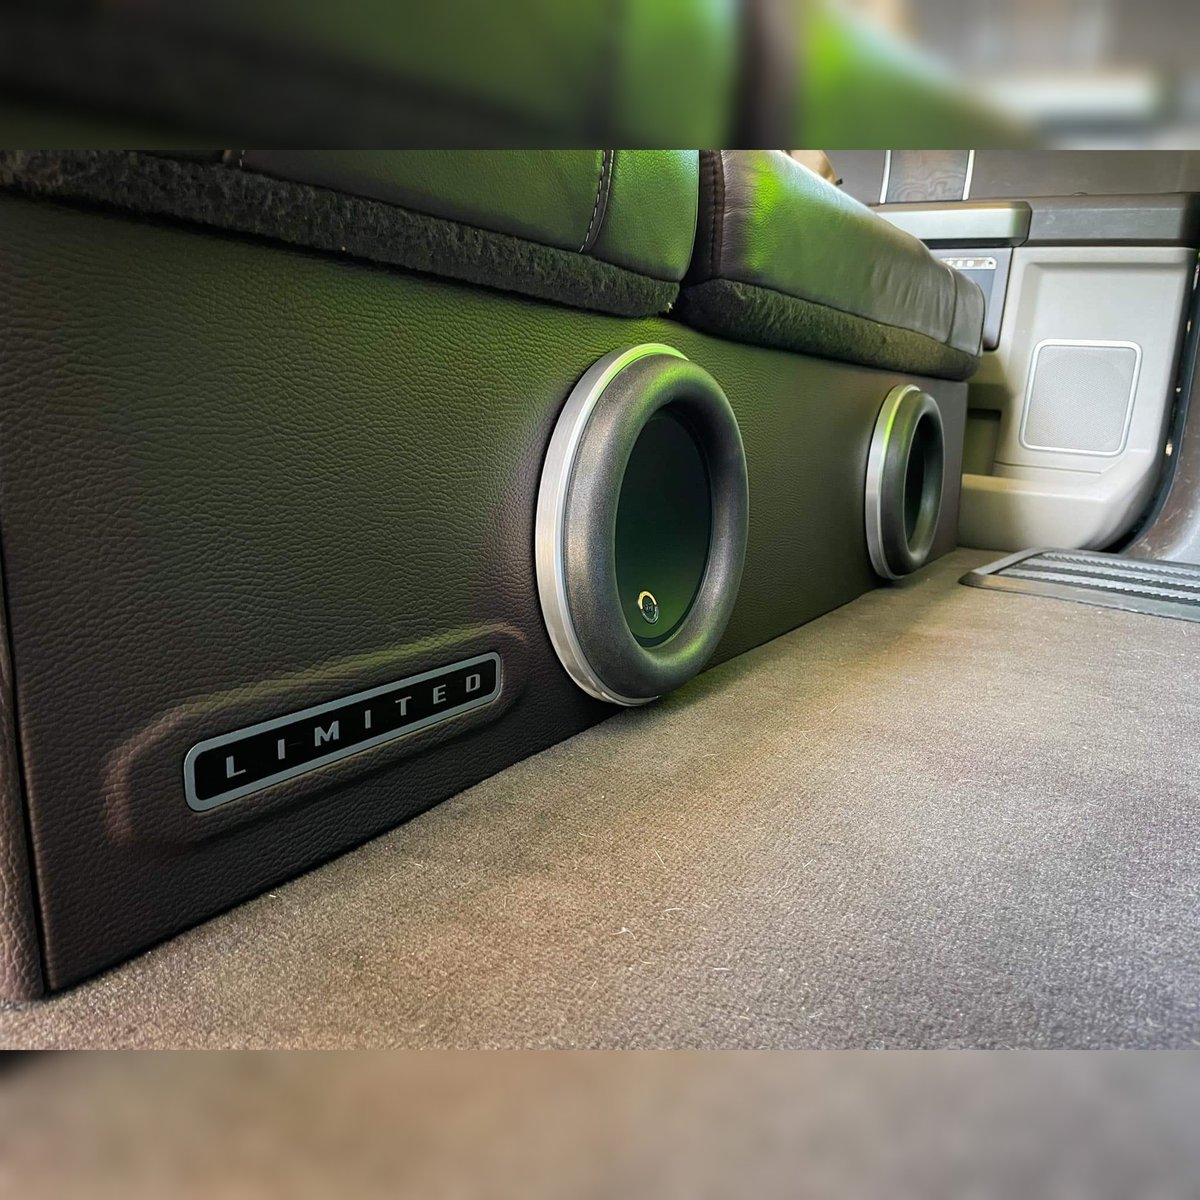 🤩👀👌Love seeing the implementation of technology in fabrication! Lino Antonio made these #doorpods with a 3d scan of the door! 

🛒Shop #caraudio - bit.ly/3z0KDgO

#12voltmag #prvaudio #12volt #caraudioaddicts #subwoofers